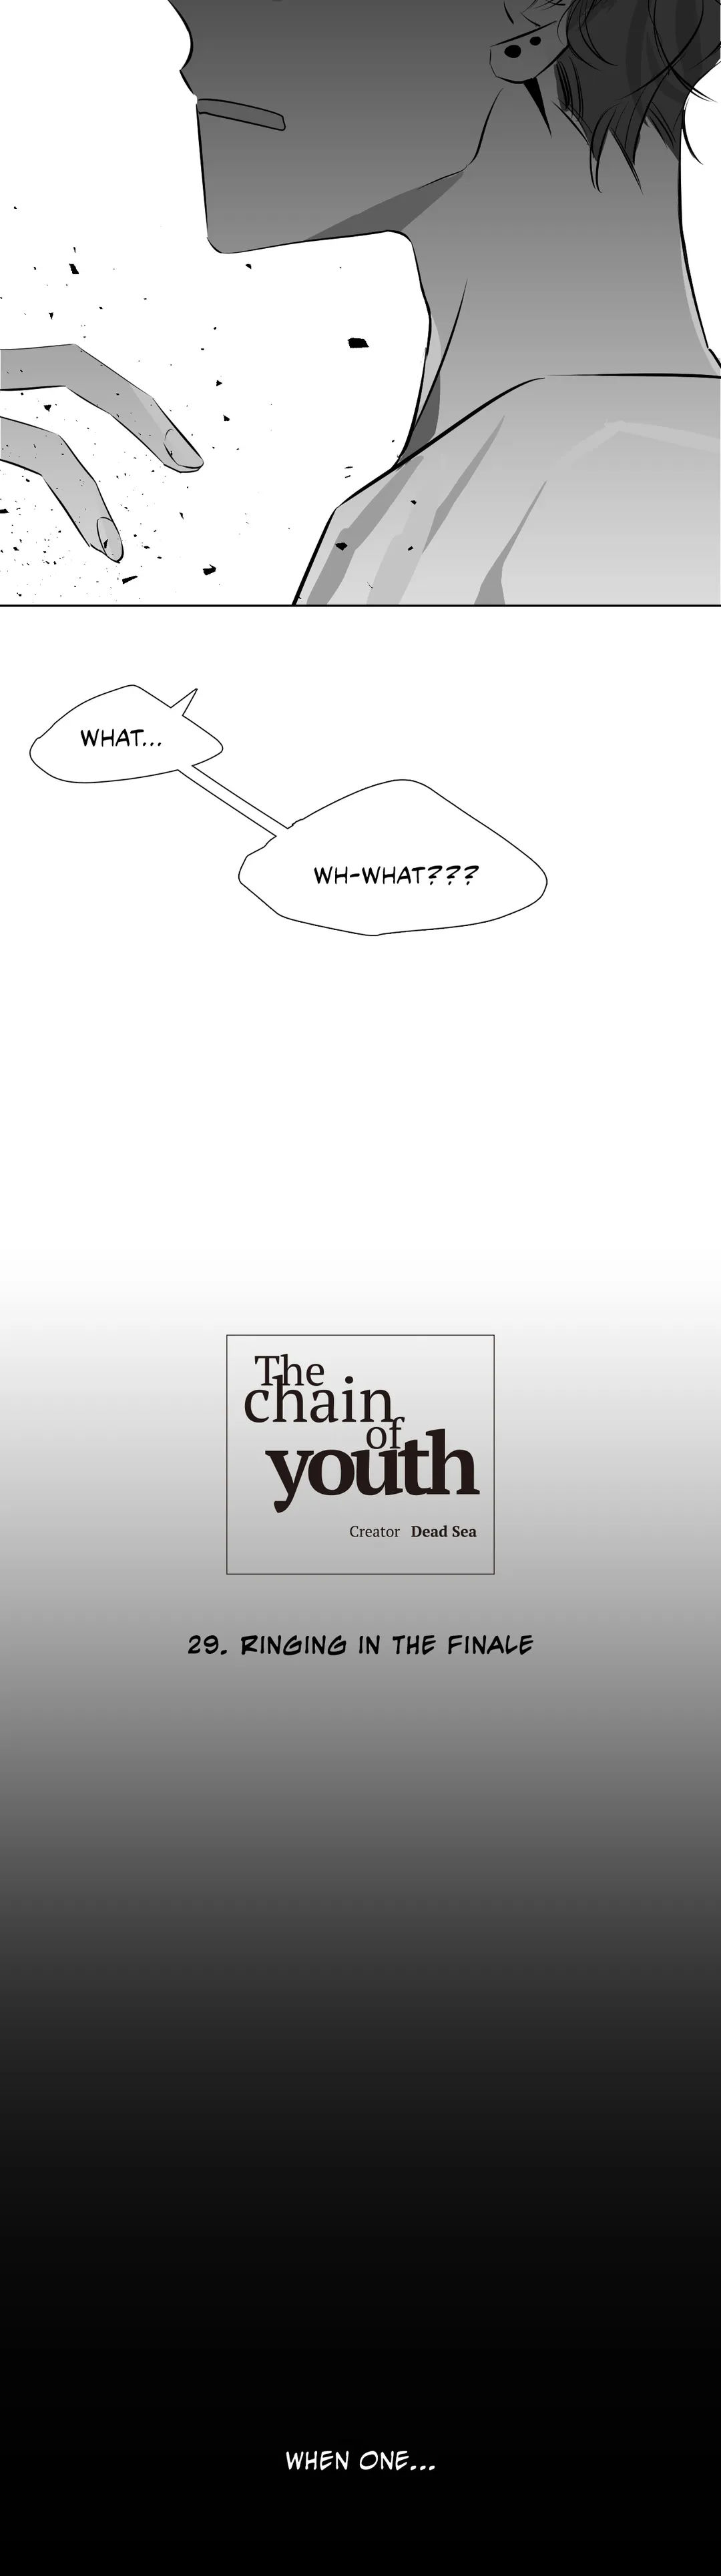 The Chain of Youth END image